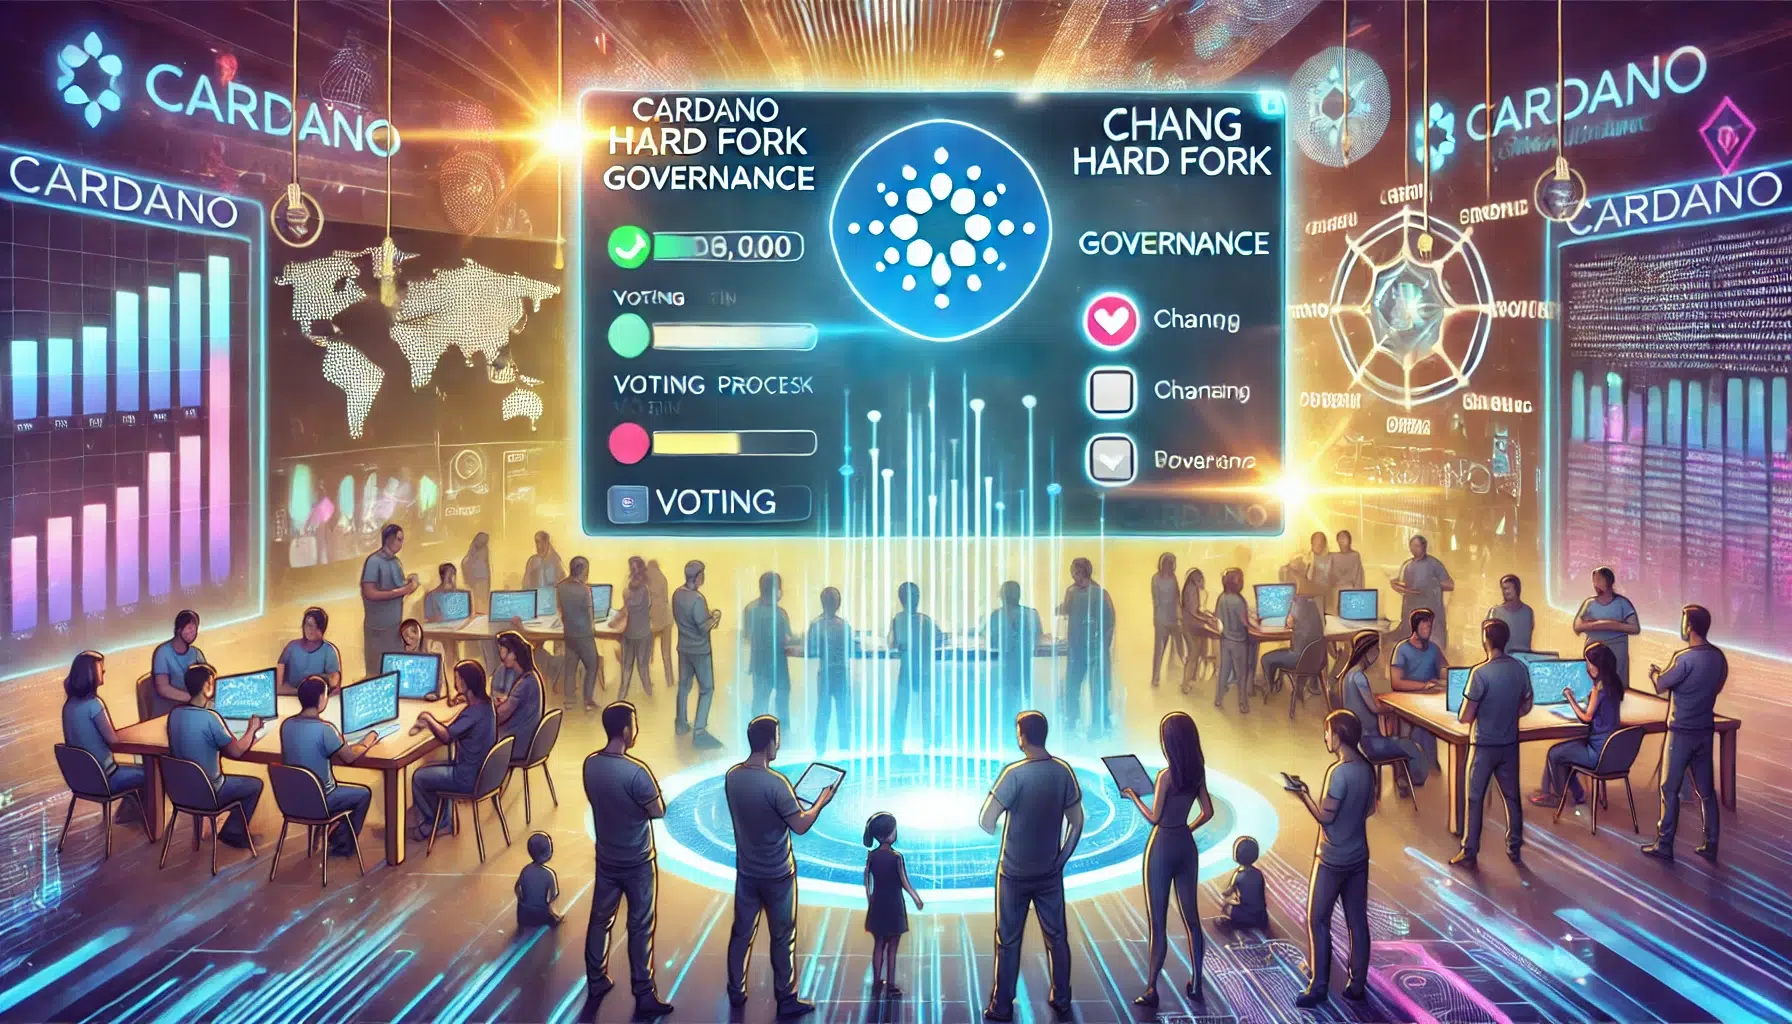 Cardano Community Initiates ICC Voting for Chang Hard Fork Governance